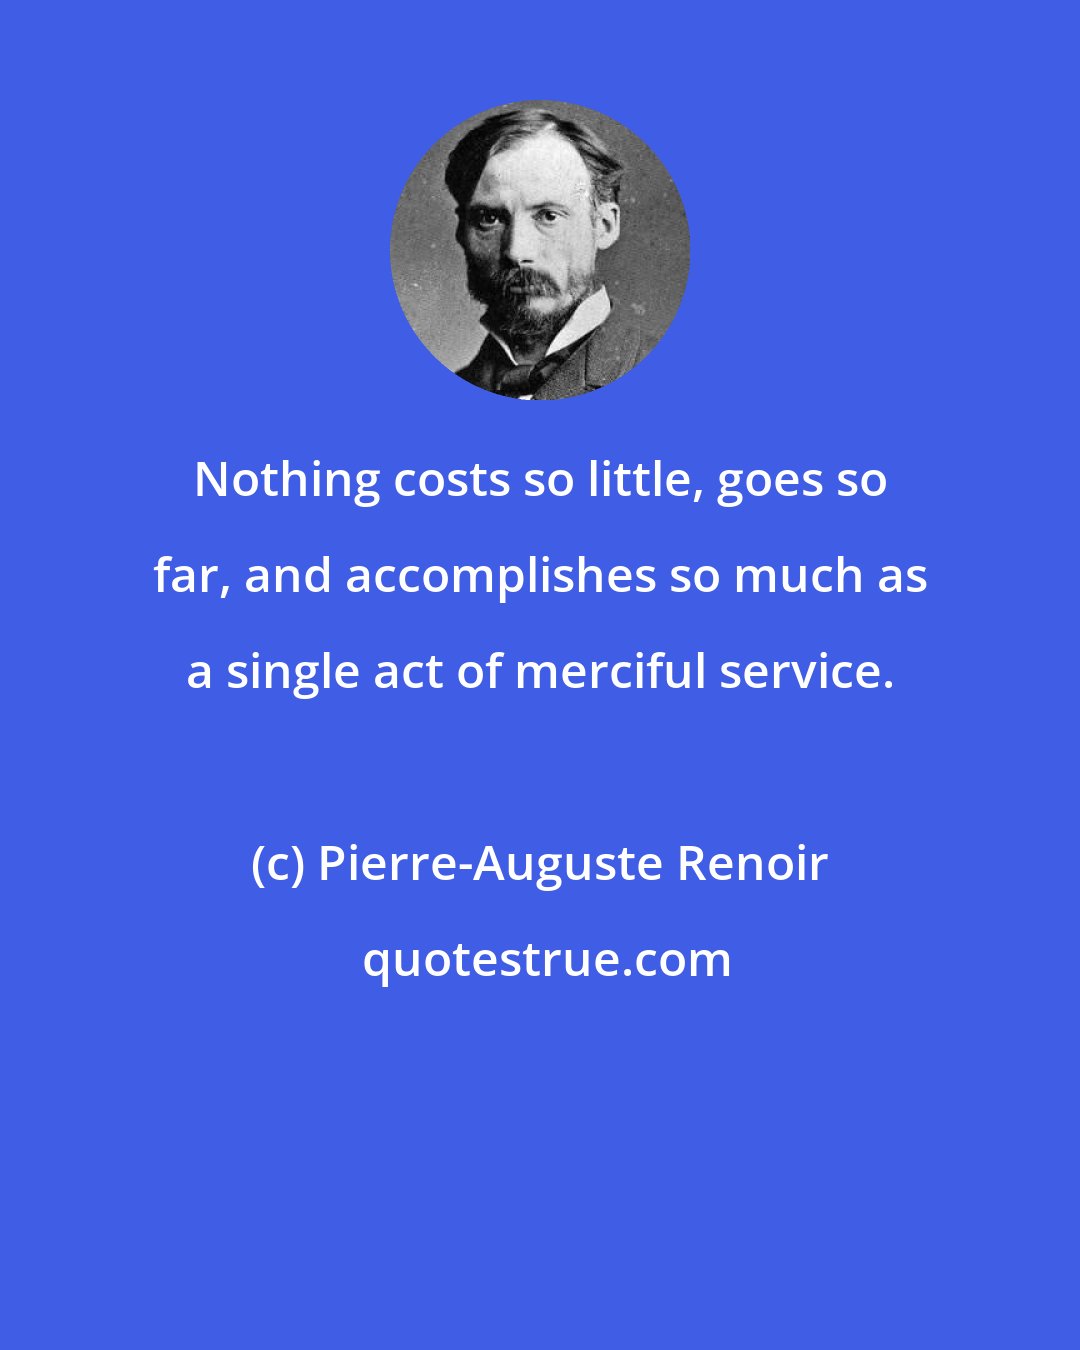 Pierre-Auguste Renoir: Nothing costs so little, goes so far, and accomplishes so much as a single act of merciful service.